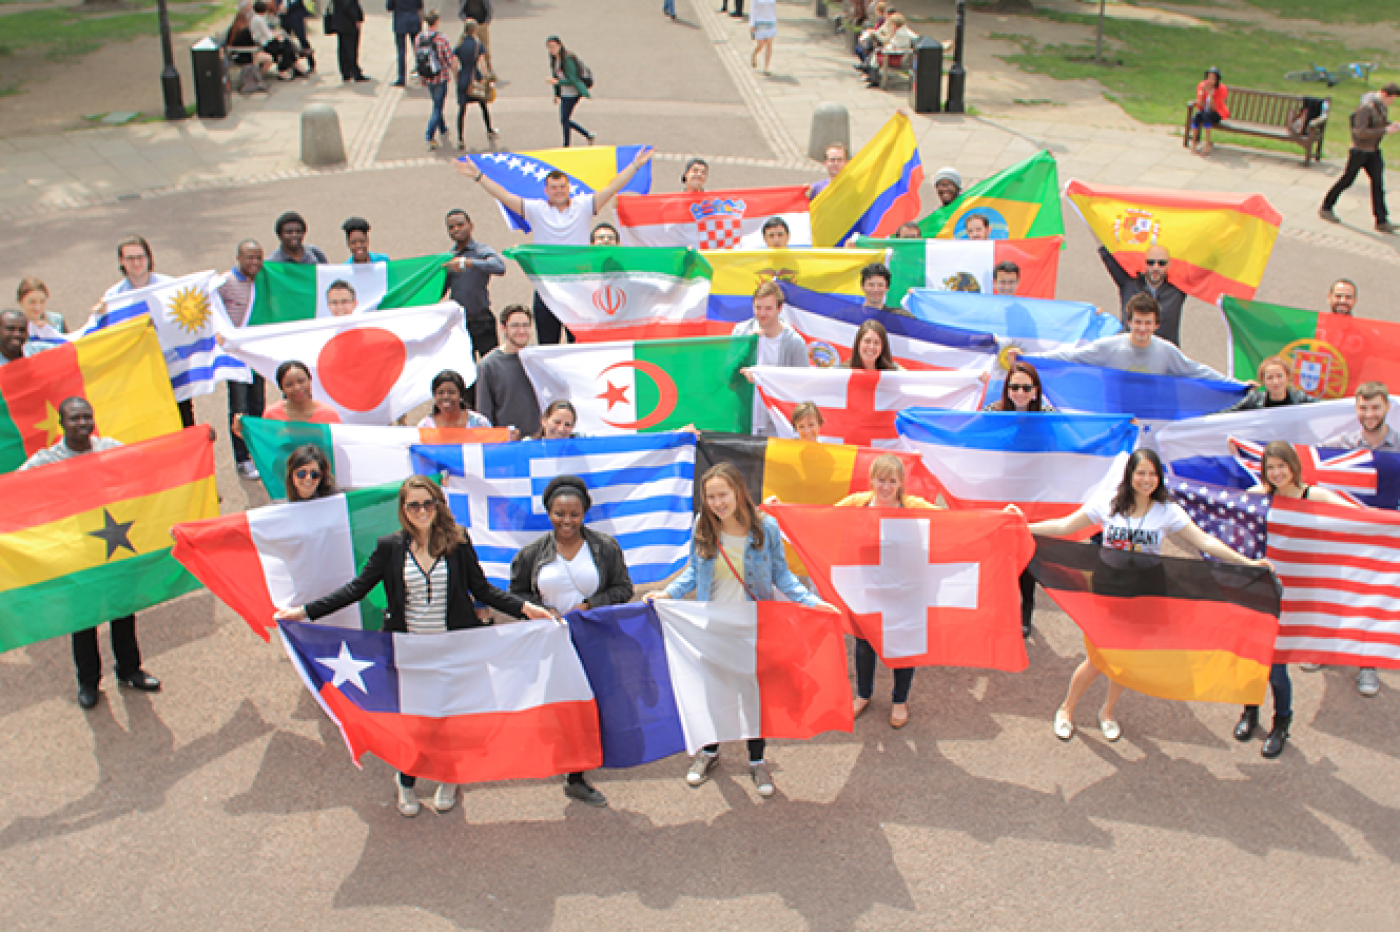 Greater support for international students on arrival